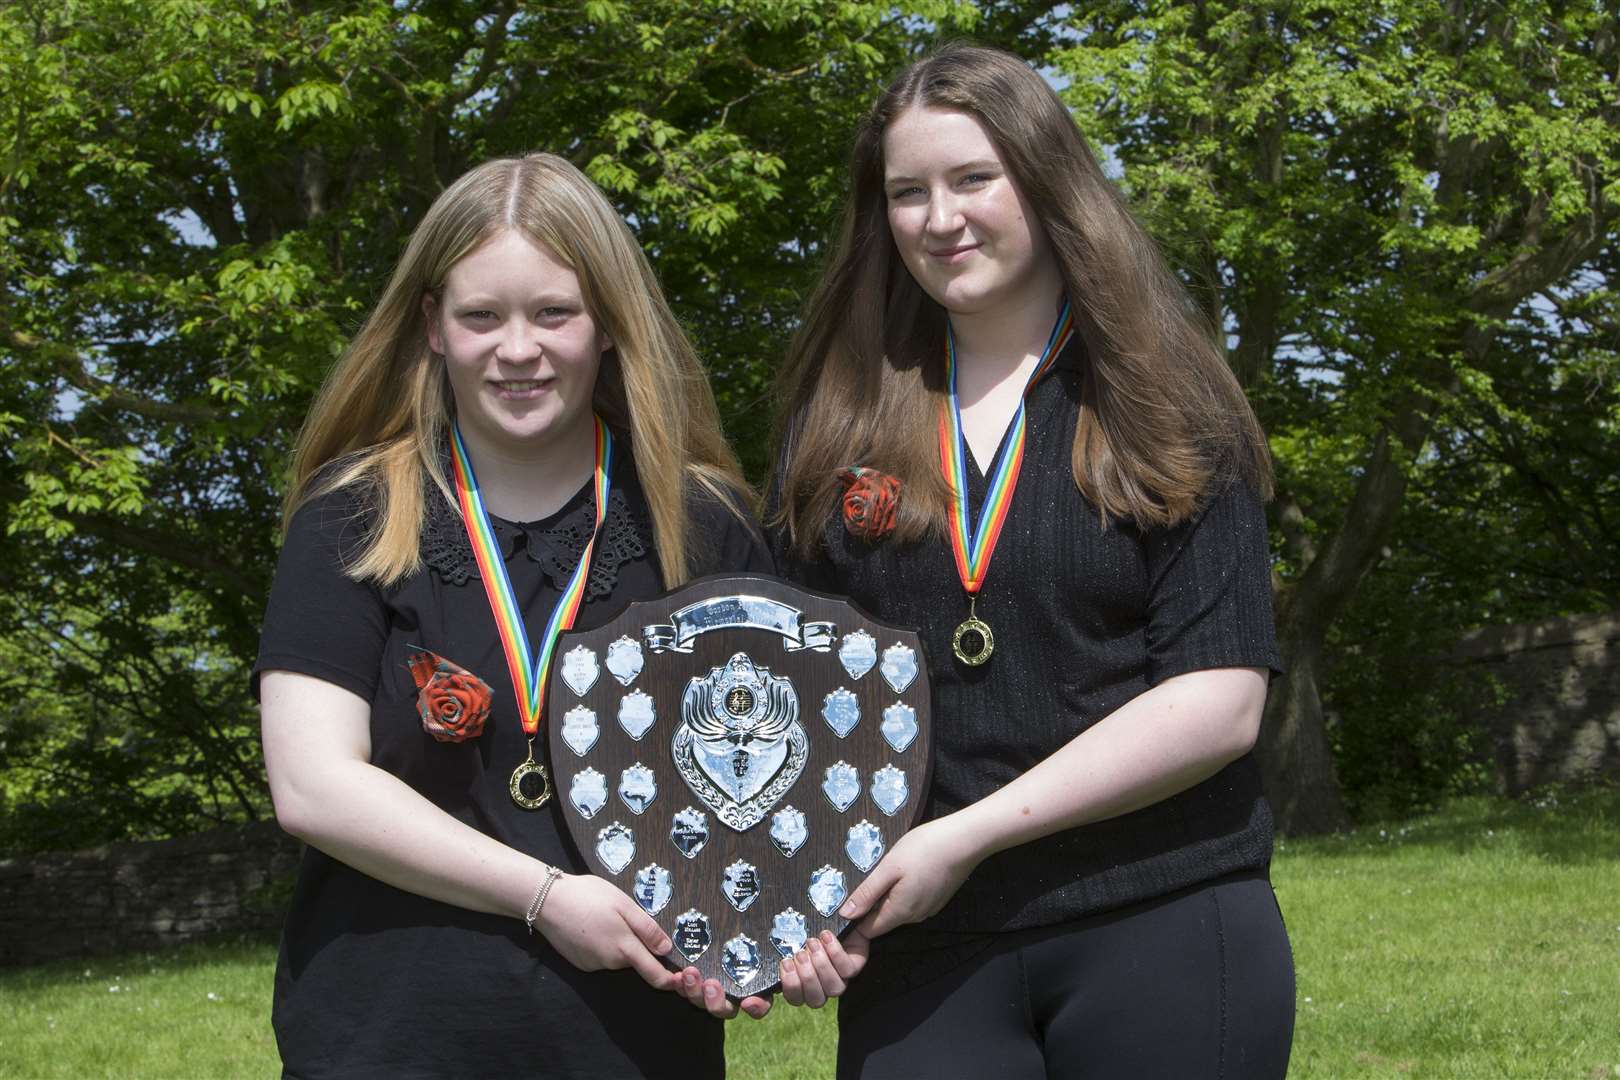 The Gordon Alexander Memorial Shield, the overall trophy for instrumental duets, was won by Camilla Elder (left) and Freya Swanson. The trophy was especially poignant for Camilla as it had been donated in 1988 in memory of her late grandfather who had died the previous year. Picture: Robert MacDonald / Northern Studios